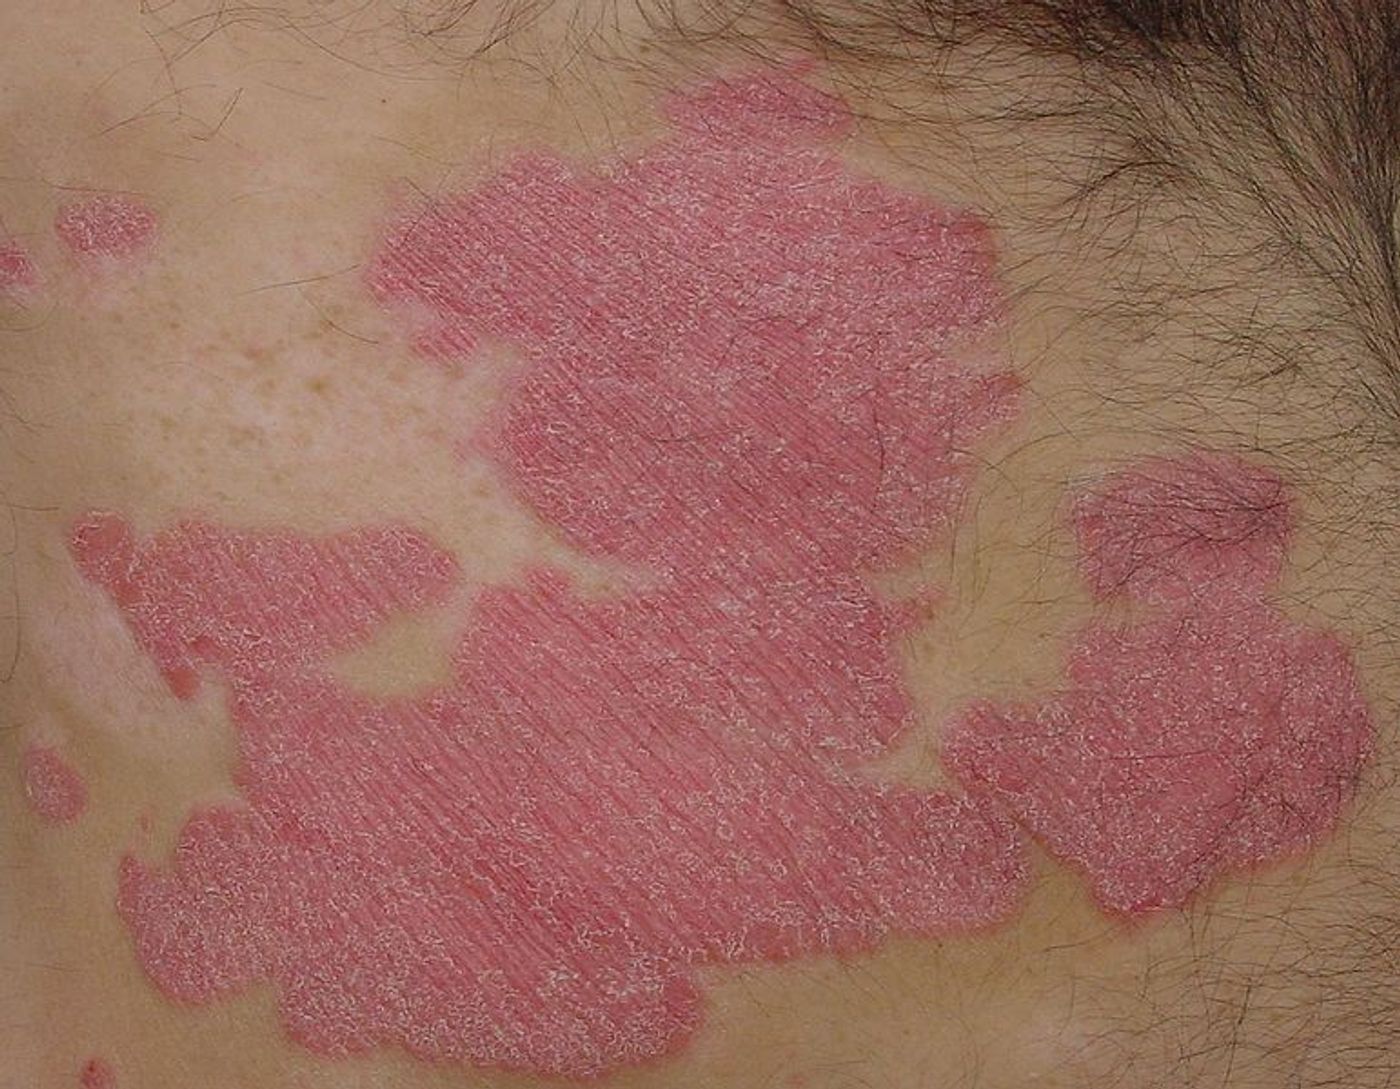 Characteristic patches of plaque psoriasis. Credit: Eisfelder